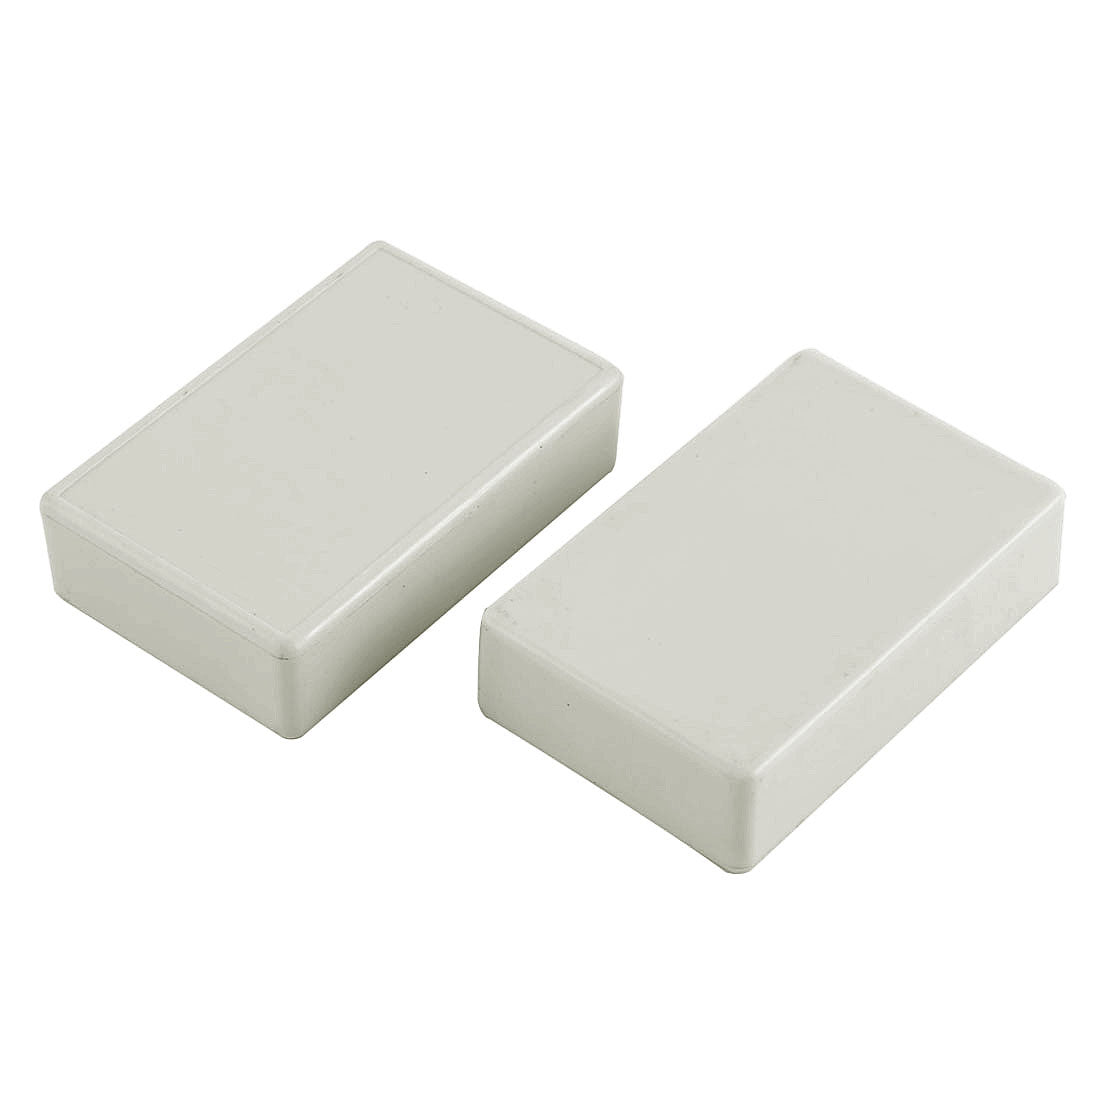 uxcell Uxcell Electronics Plastic Water Resistant DIY Enclosure Junction Box Case White 2 Pcs